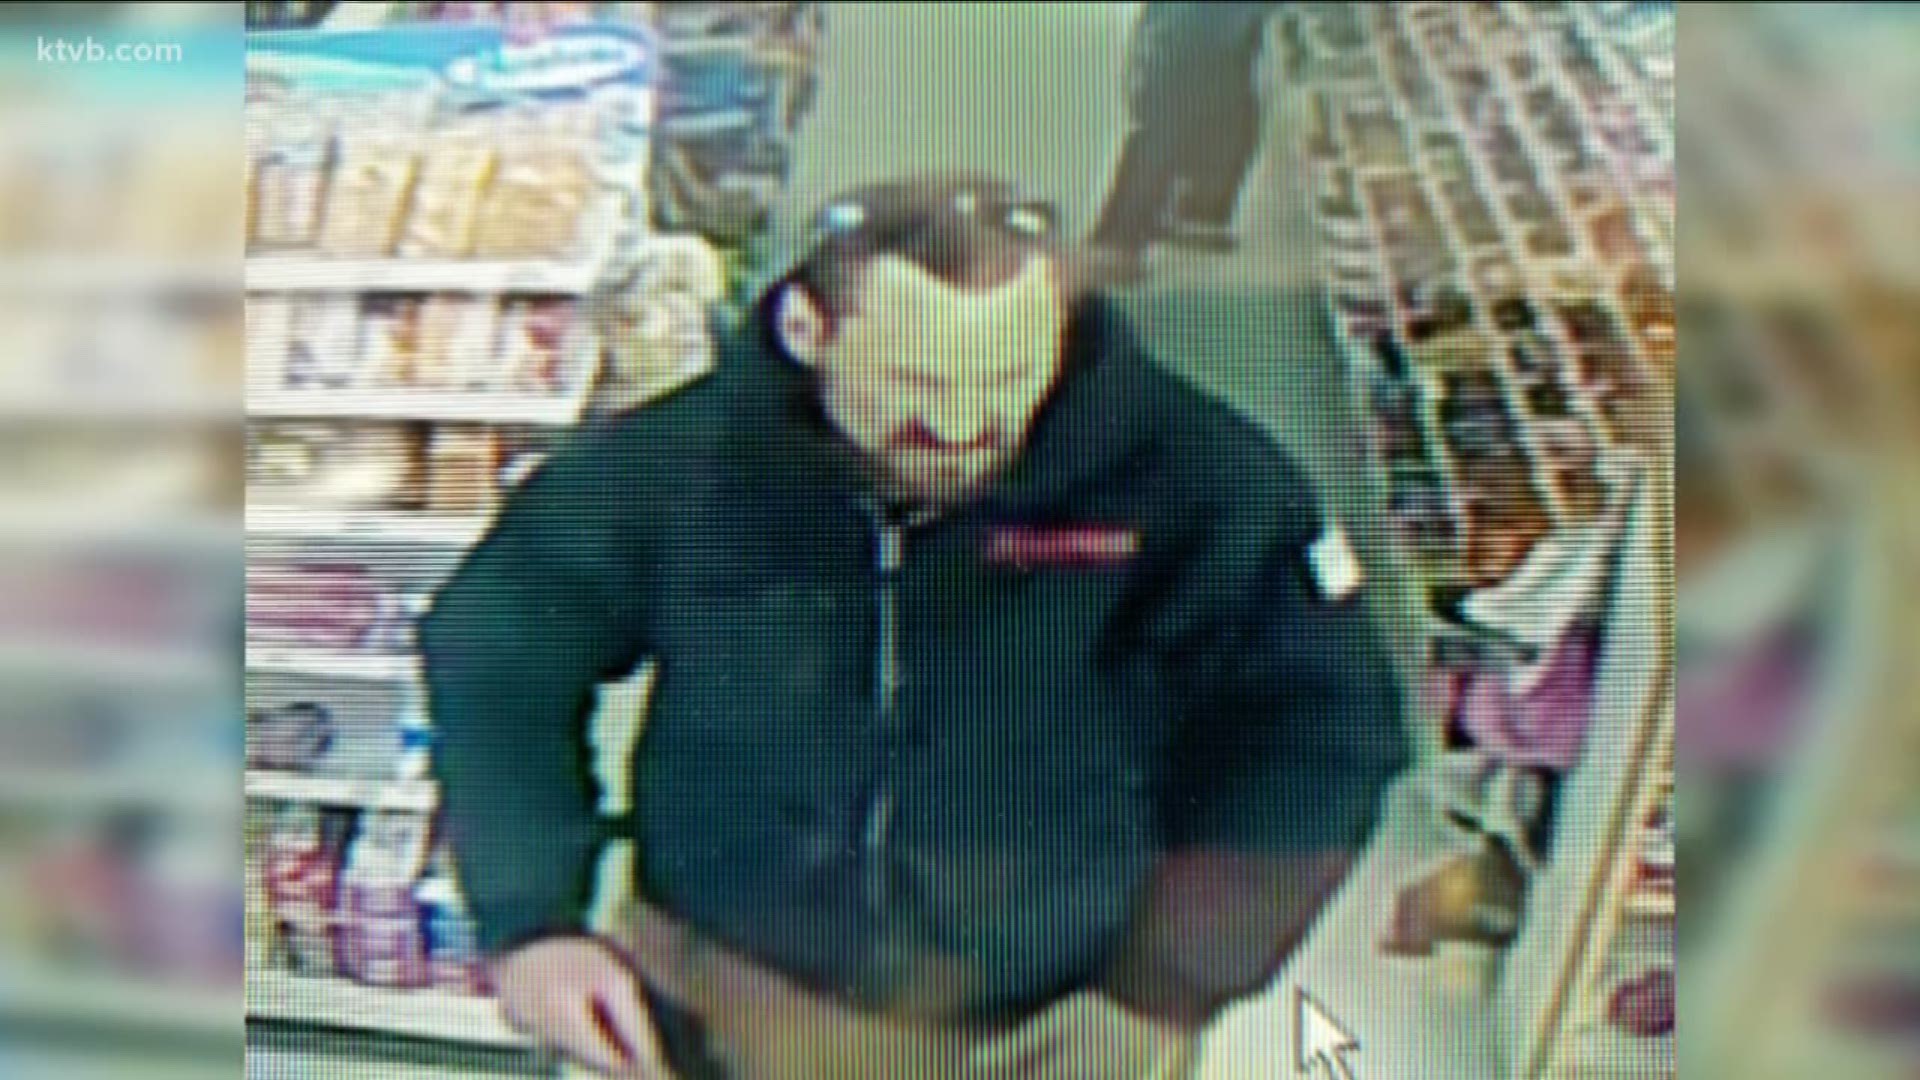 Police released surveillance photos of the man at a convenience store in Osgood, an unincorporated community north of Idaho Falls.